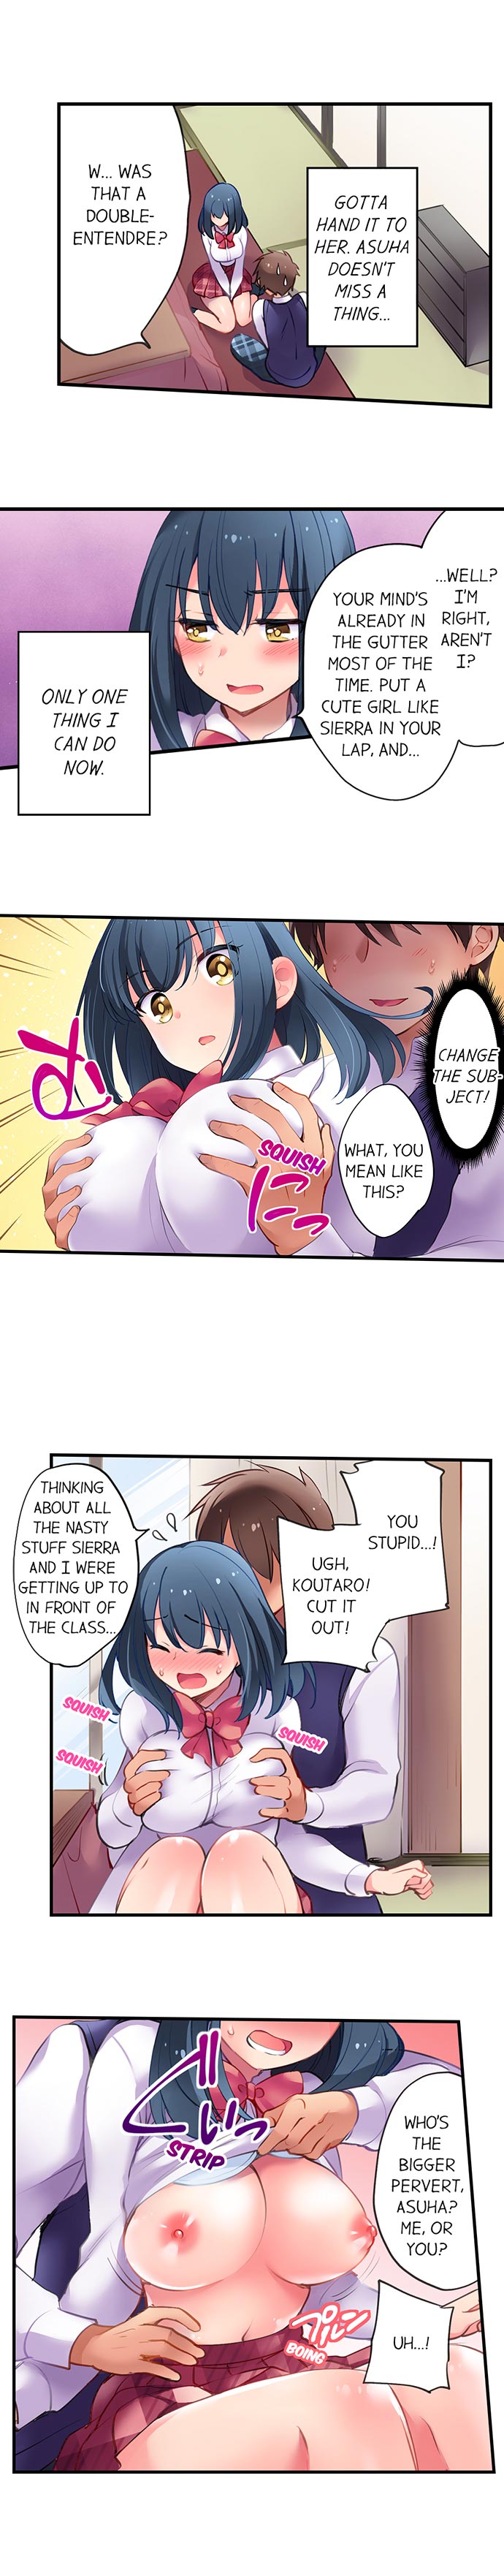 Cultural Appreciation Meets Sexual Education - Chapter 5 Page 3